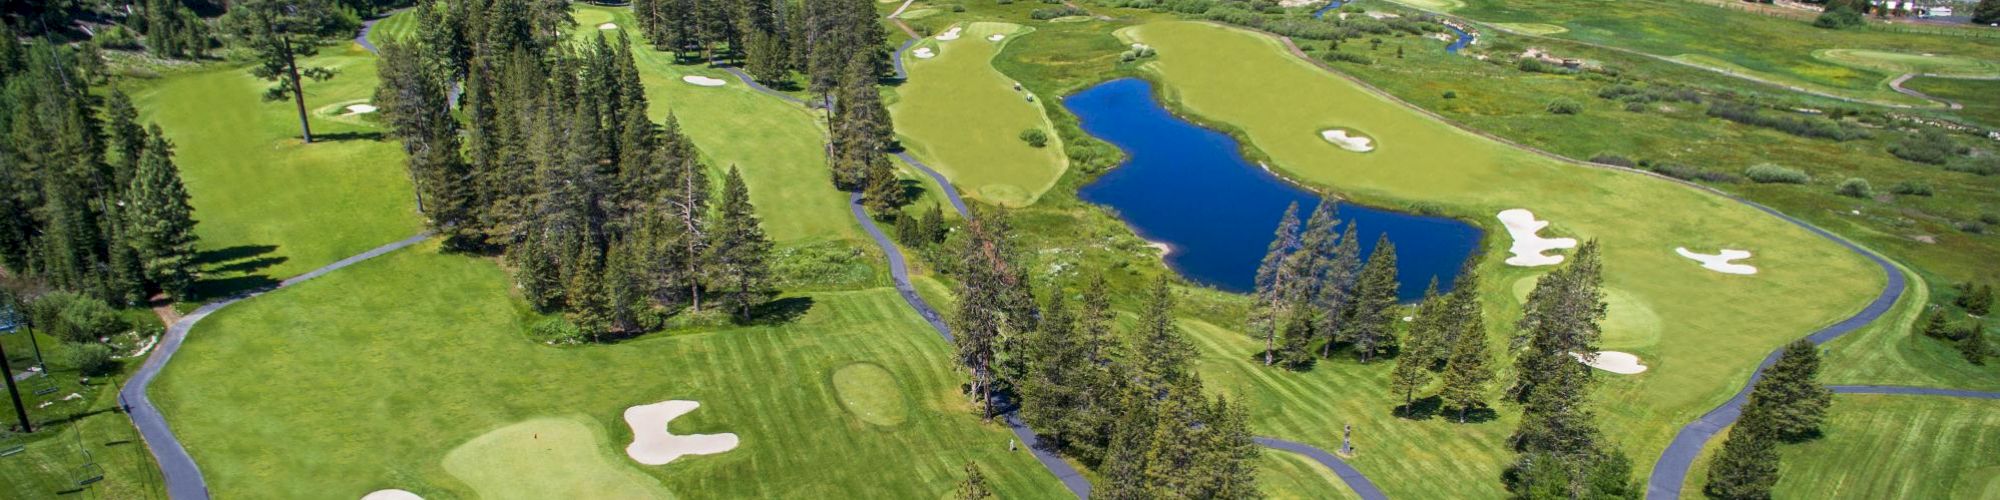 This image shows an aerial view of a scenic golf course surrounded by trees and mountains, with a lake in the middle, set in a beautiful valley.